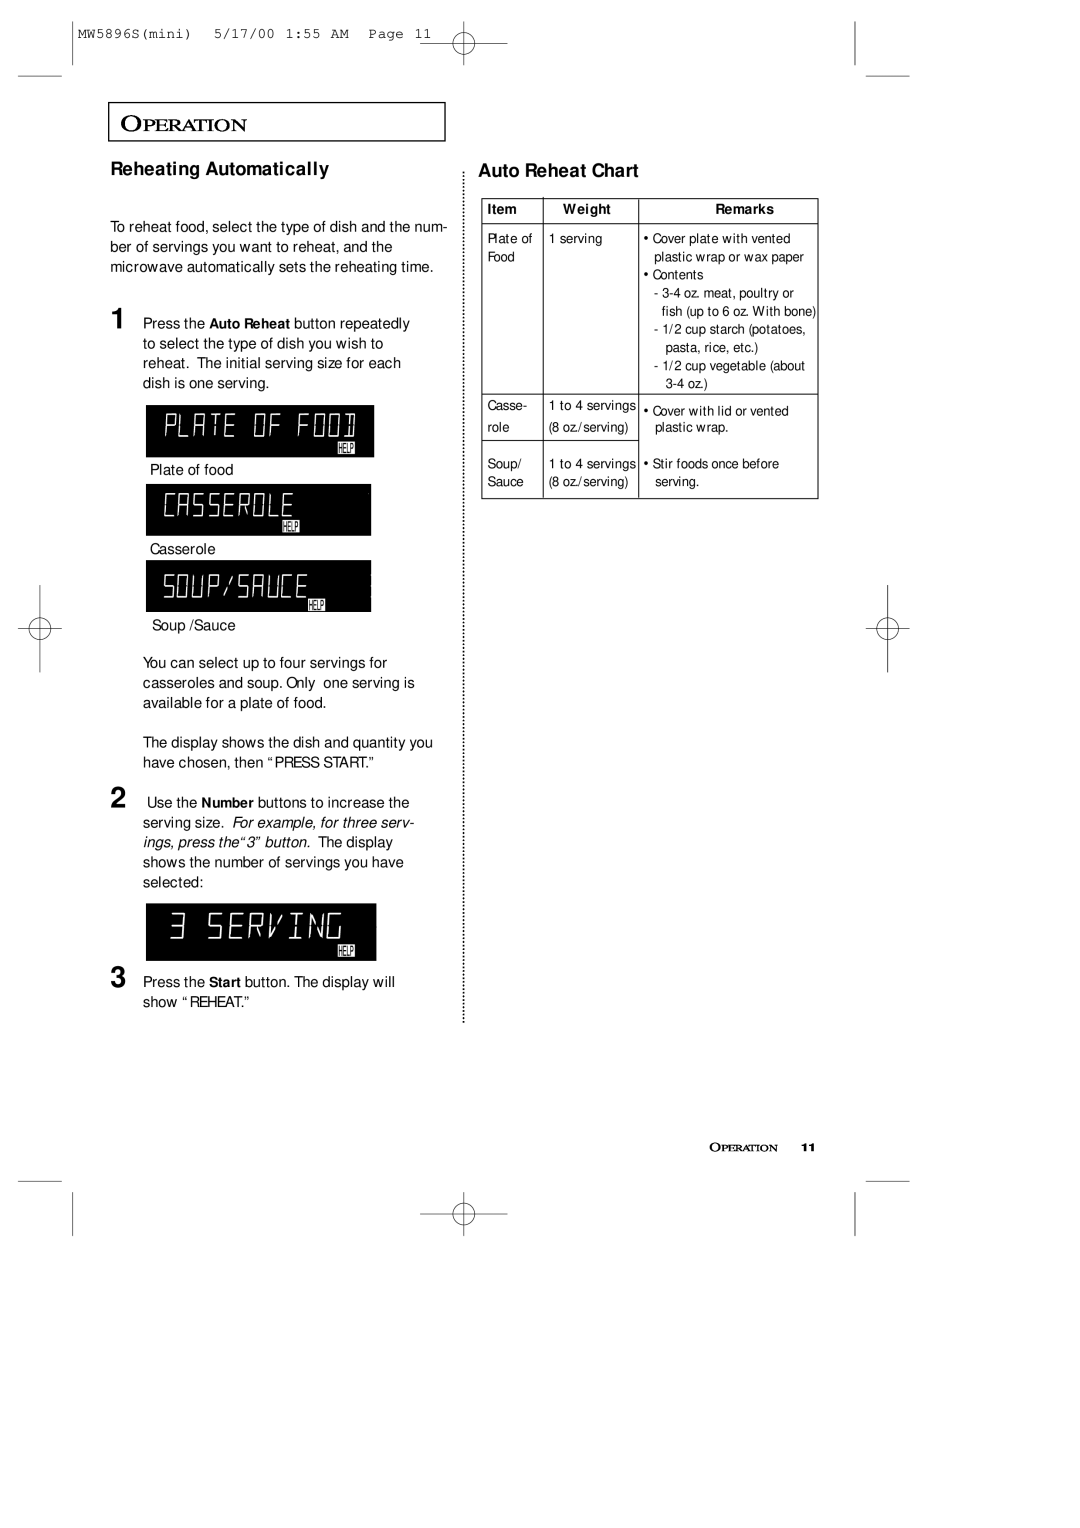 Samsung MW5892S owner manual Reheating Automatically, Auto Reheat Chart, Operation 